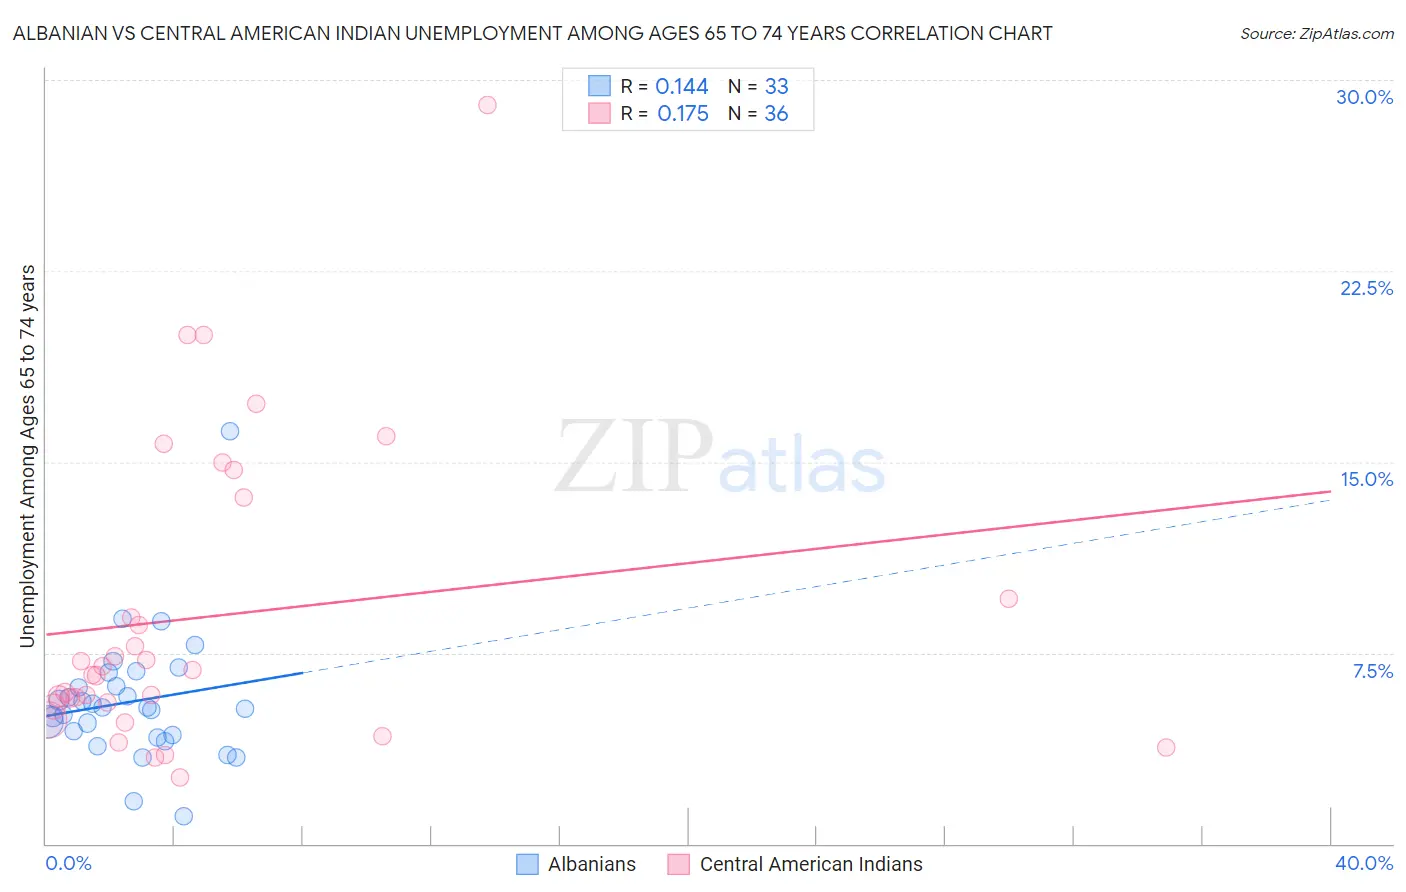 Albanian vs Central American Indian Unemployment Among Ages 65 to 74 years